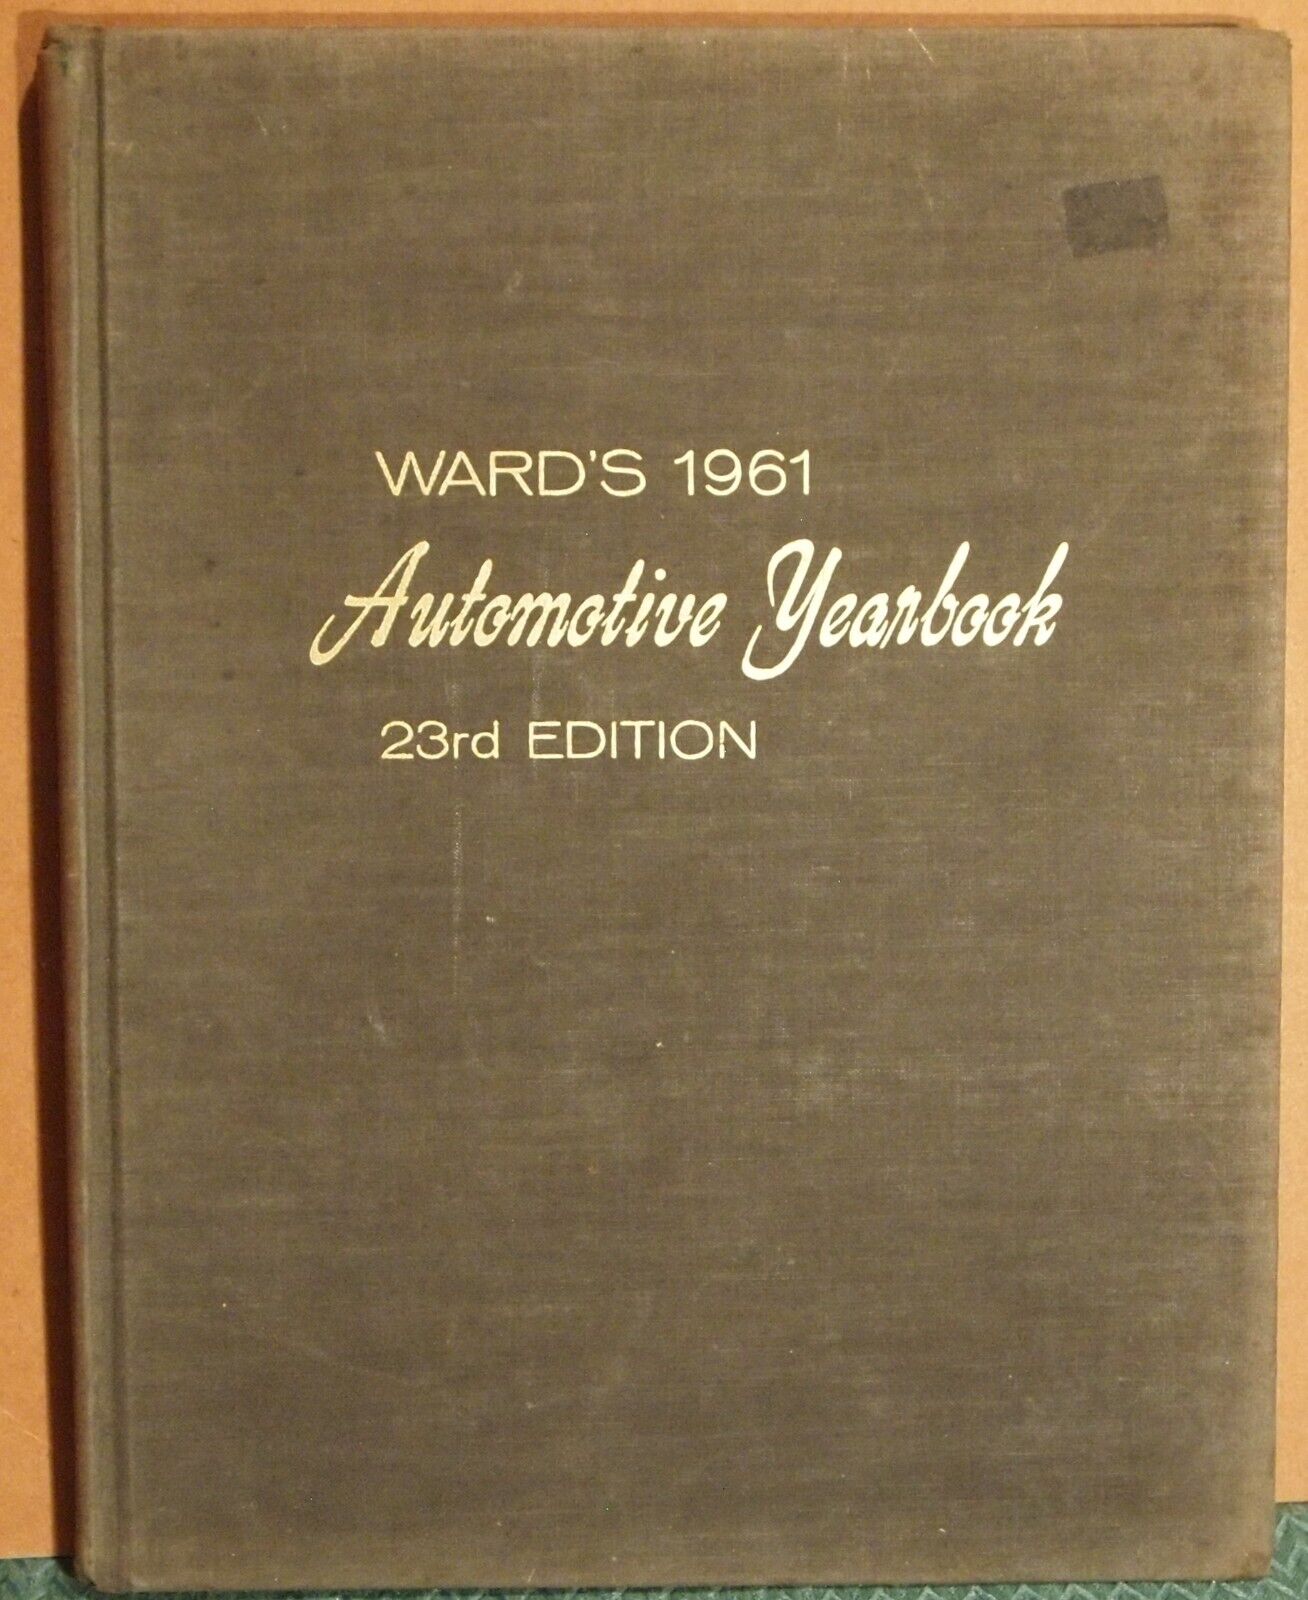 1961 WARD'S AUTOMOTIVE YEARBOOK 23rd edition WARDS-12